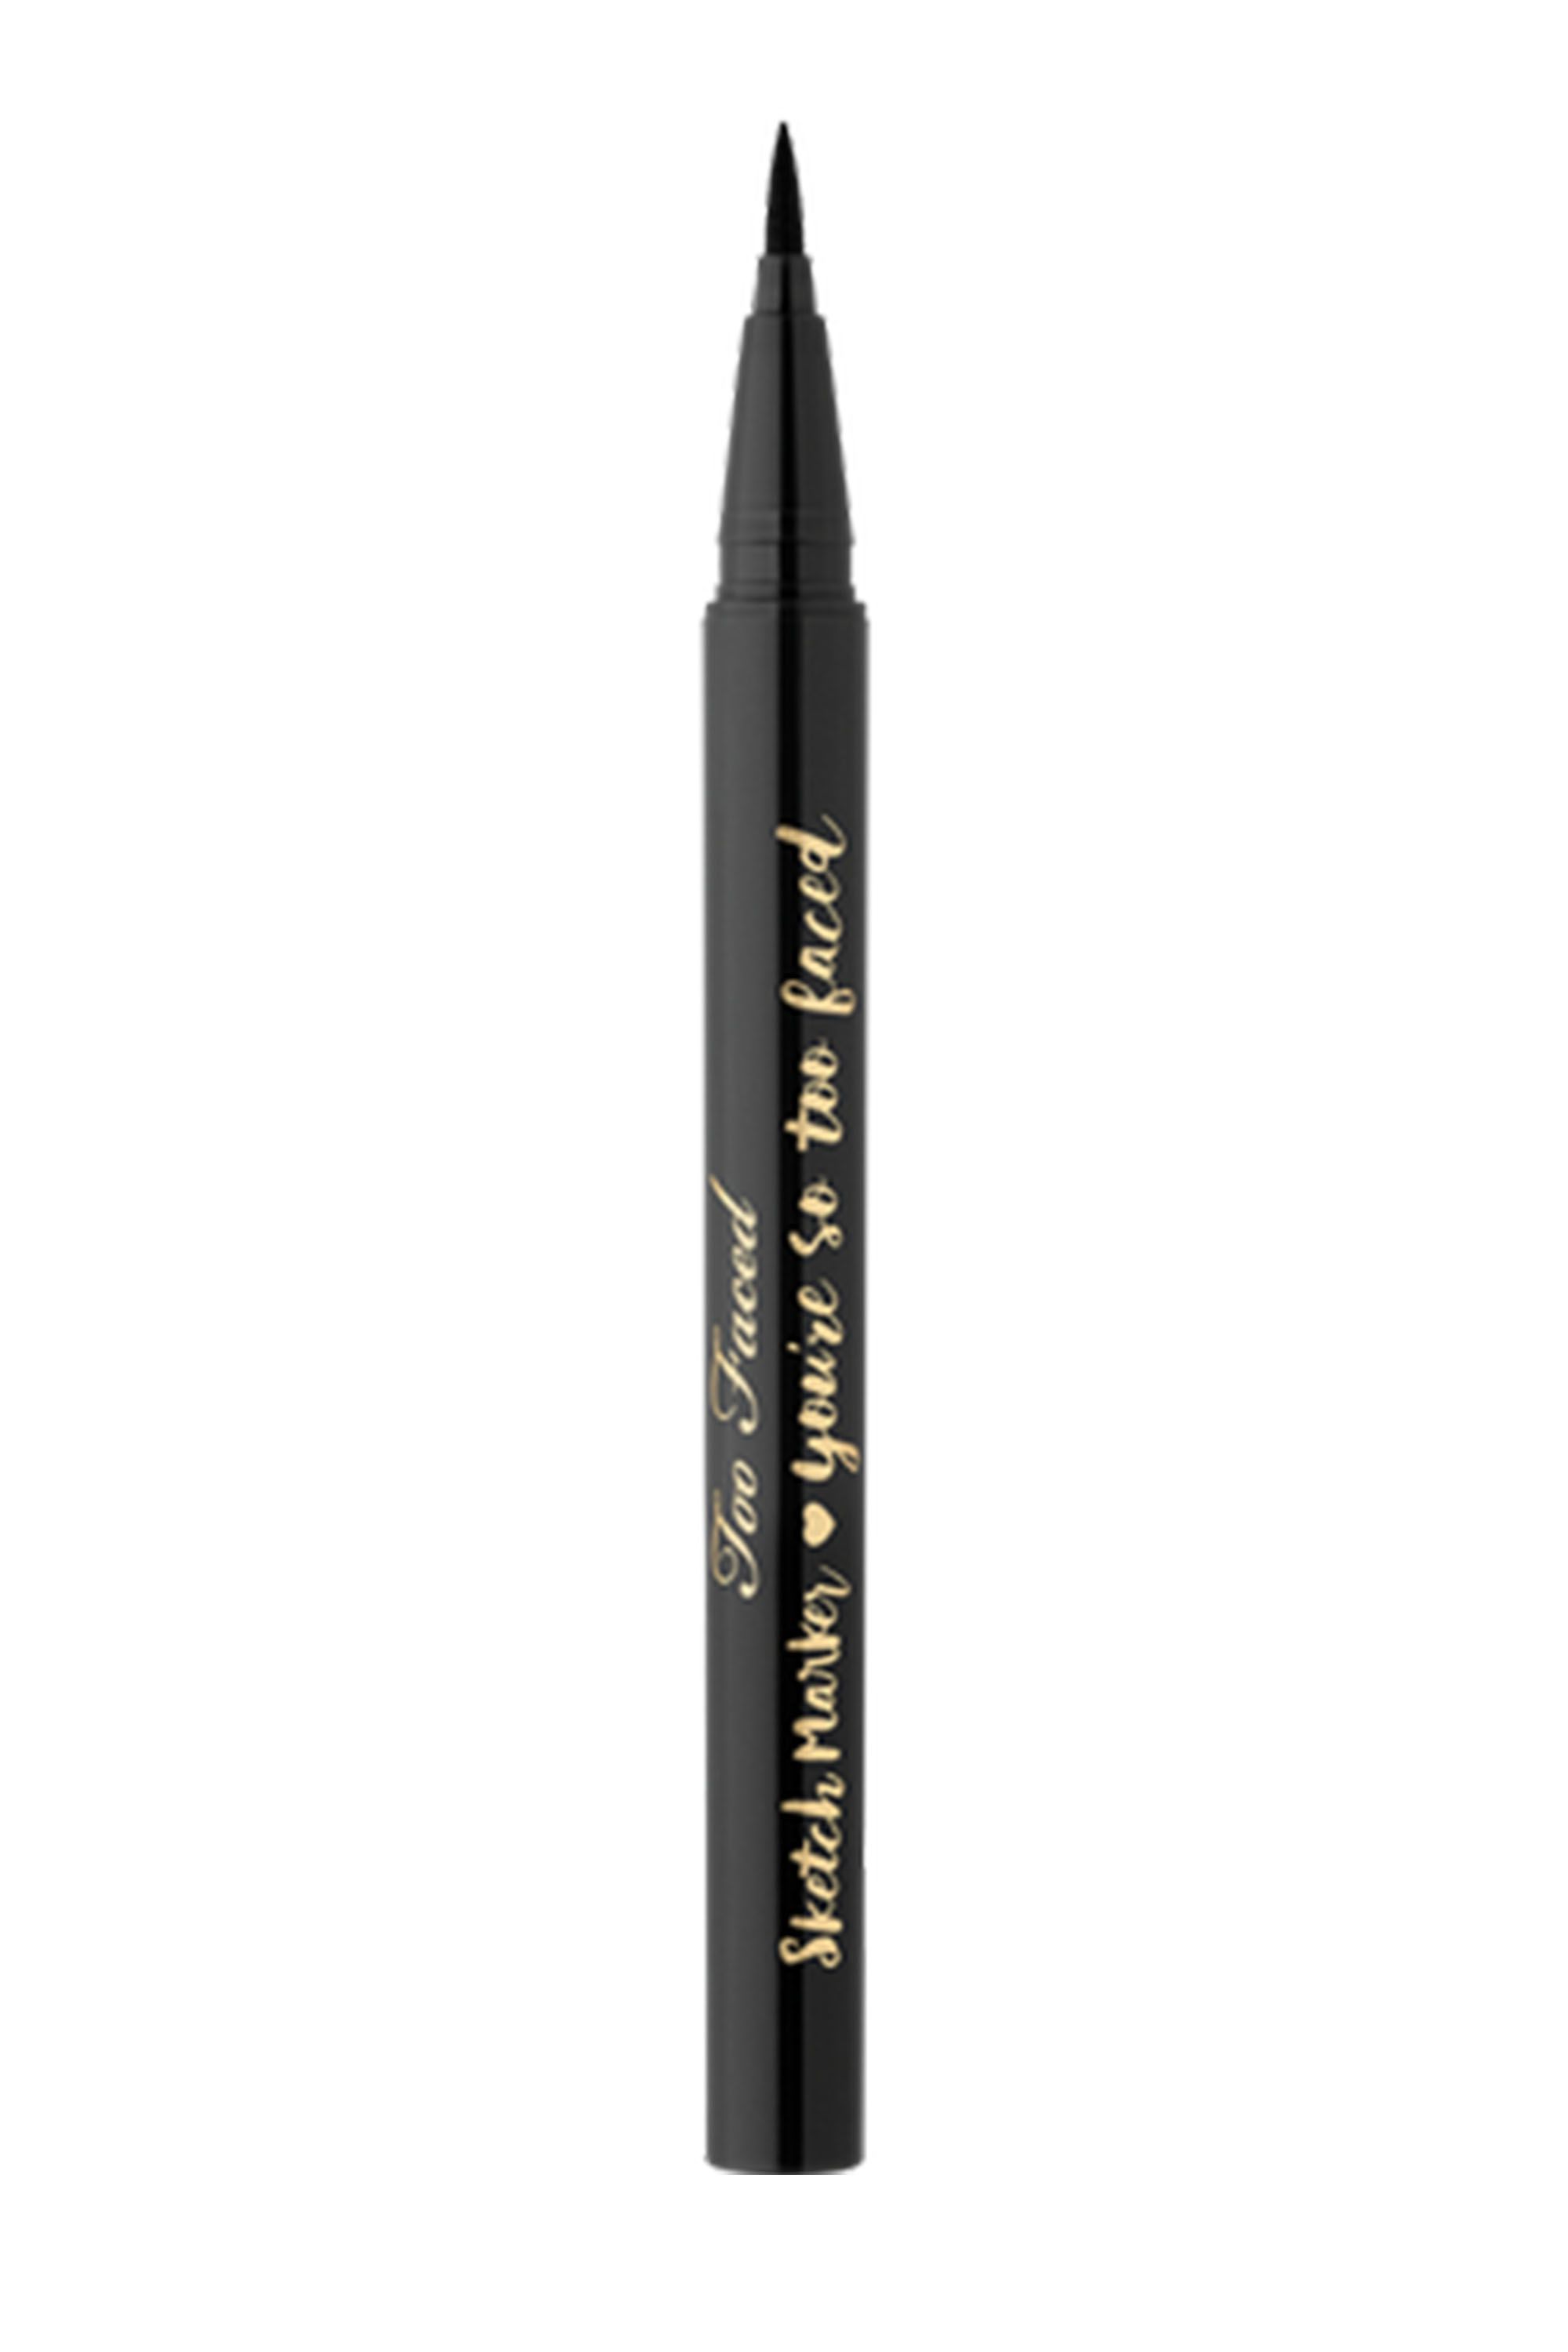 Buy GLAVON 36 Hrs High Precision Liquid Waterproof Eyeliner Pencil with  Free ADS Eye Care Waterproof Kajal Pencil [ Combo of 9 Items ] Online at  Low Prices in India - Amazon.in